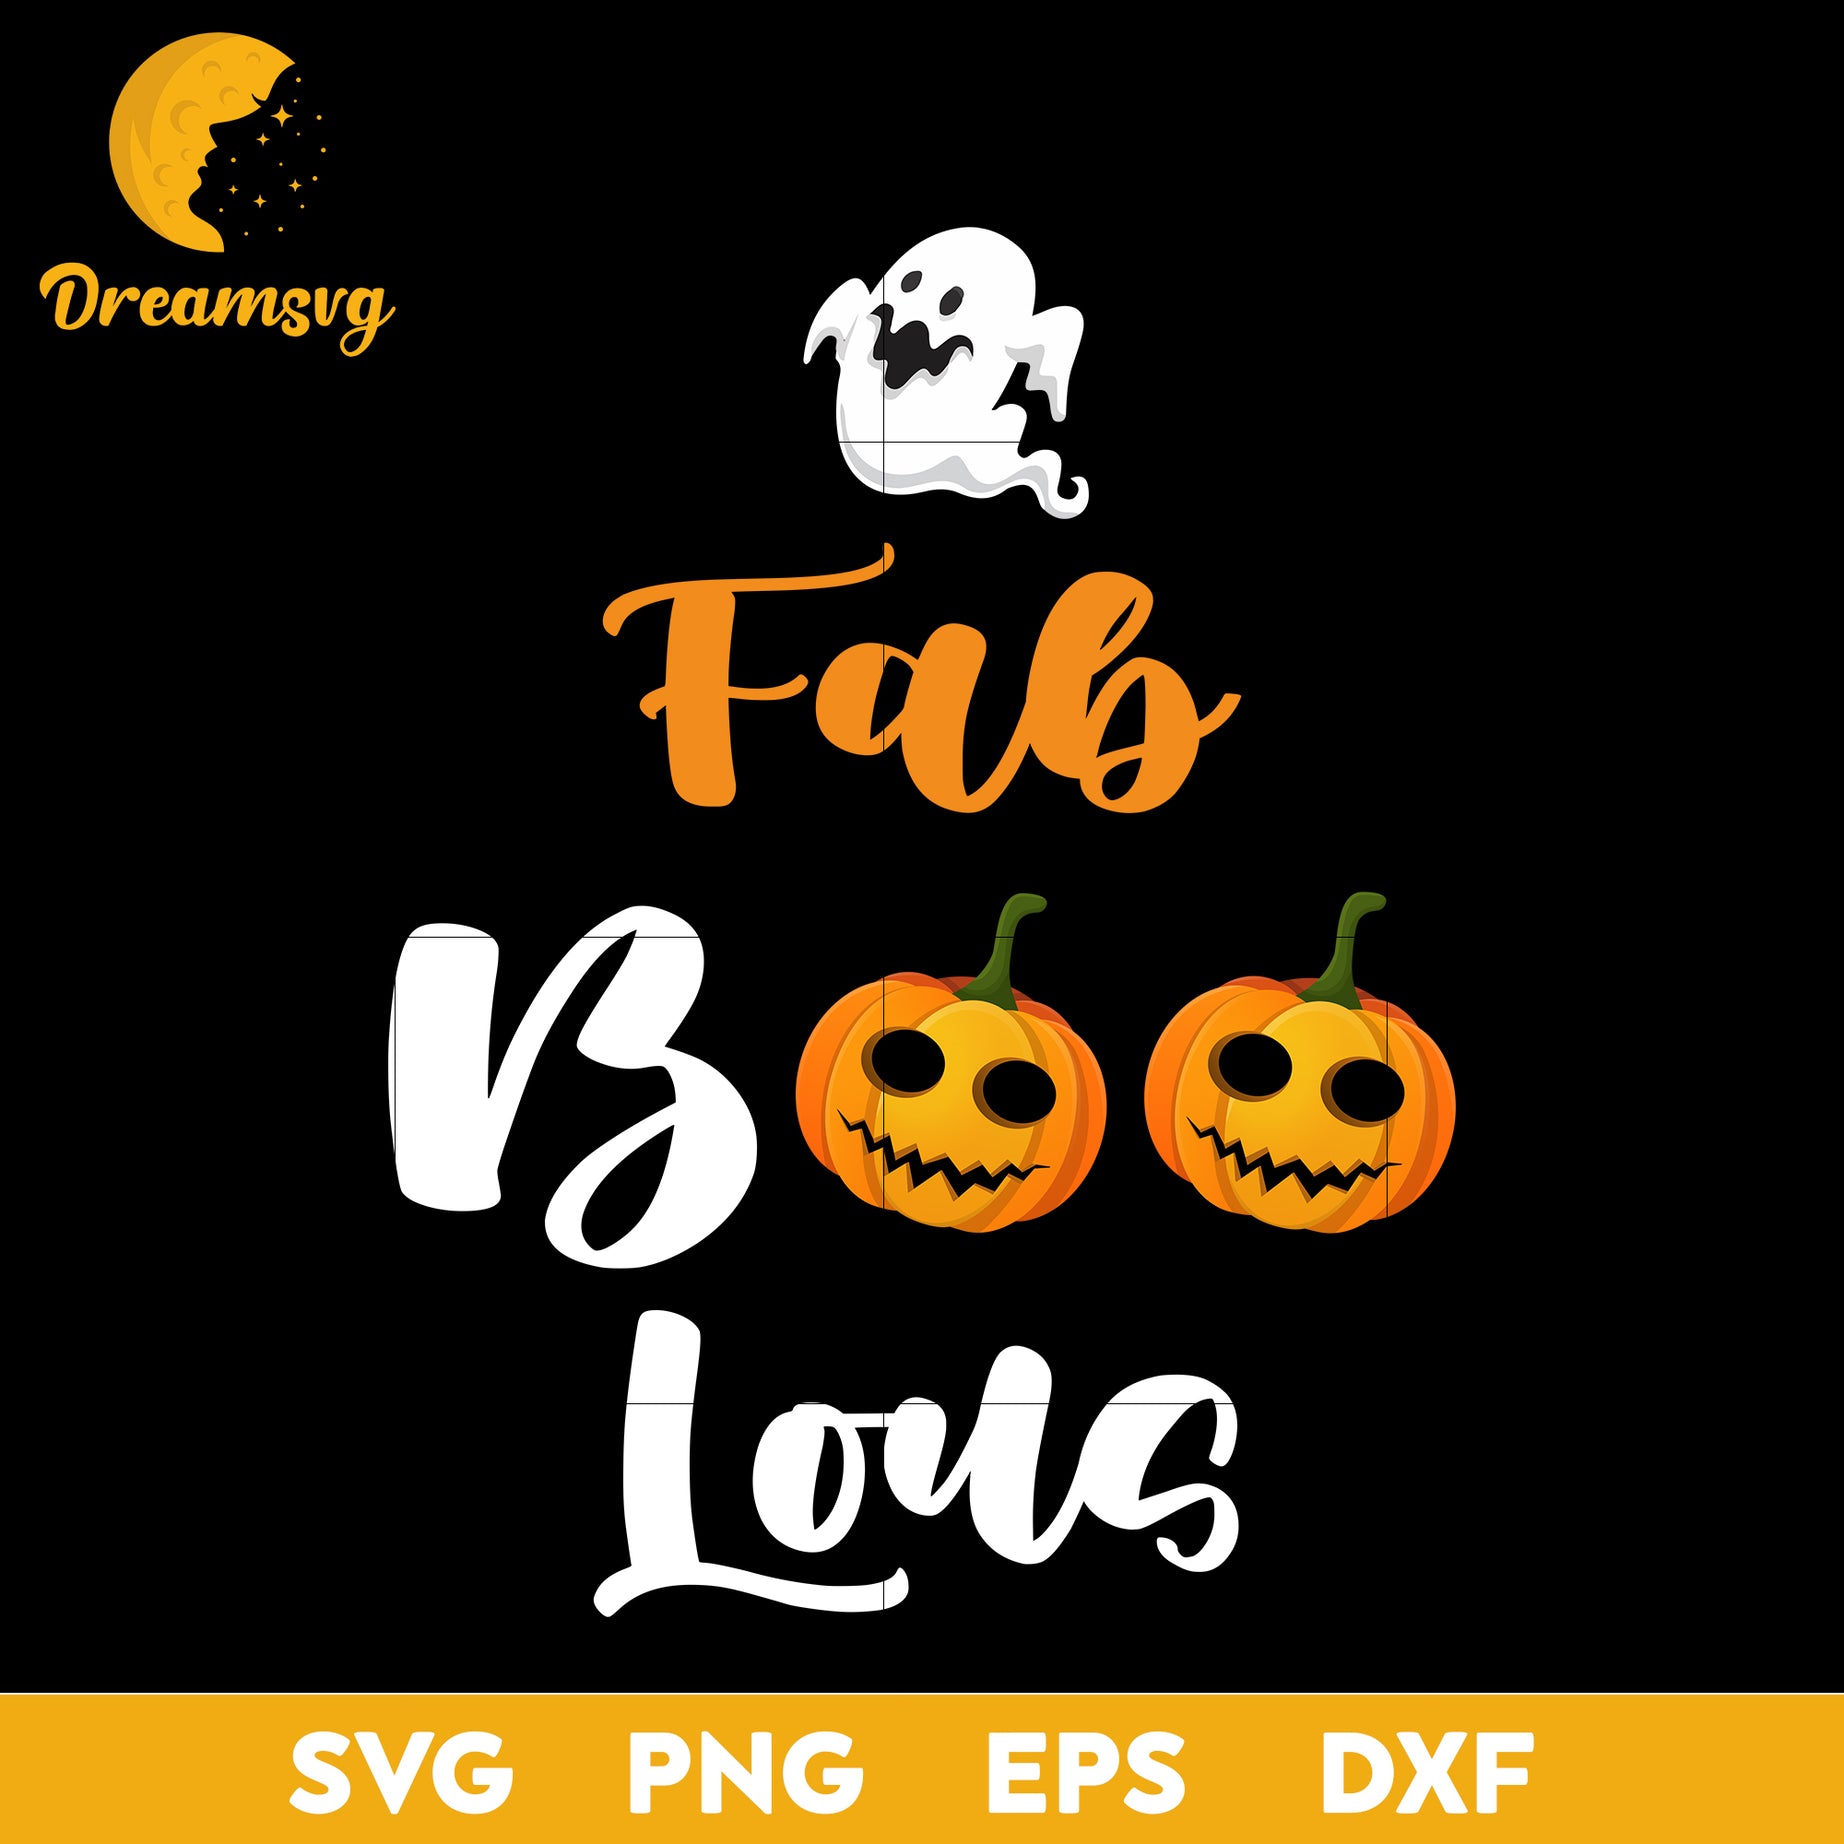 Fab boo lous svg, Halloween svg, png, dxf, eps digital file.